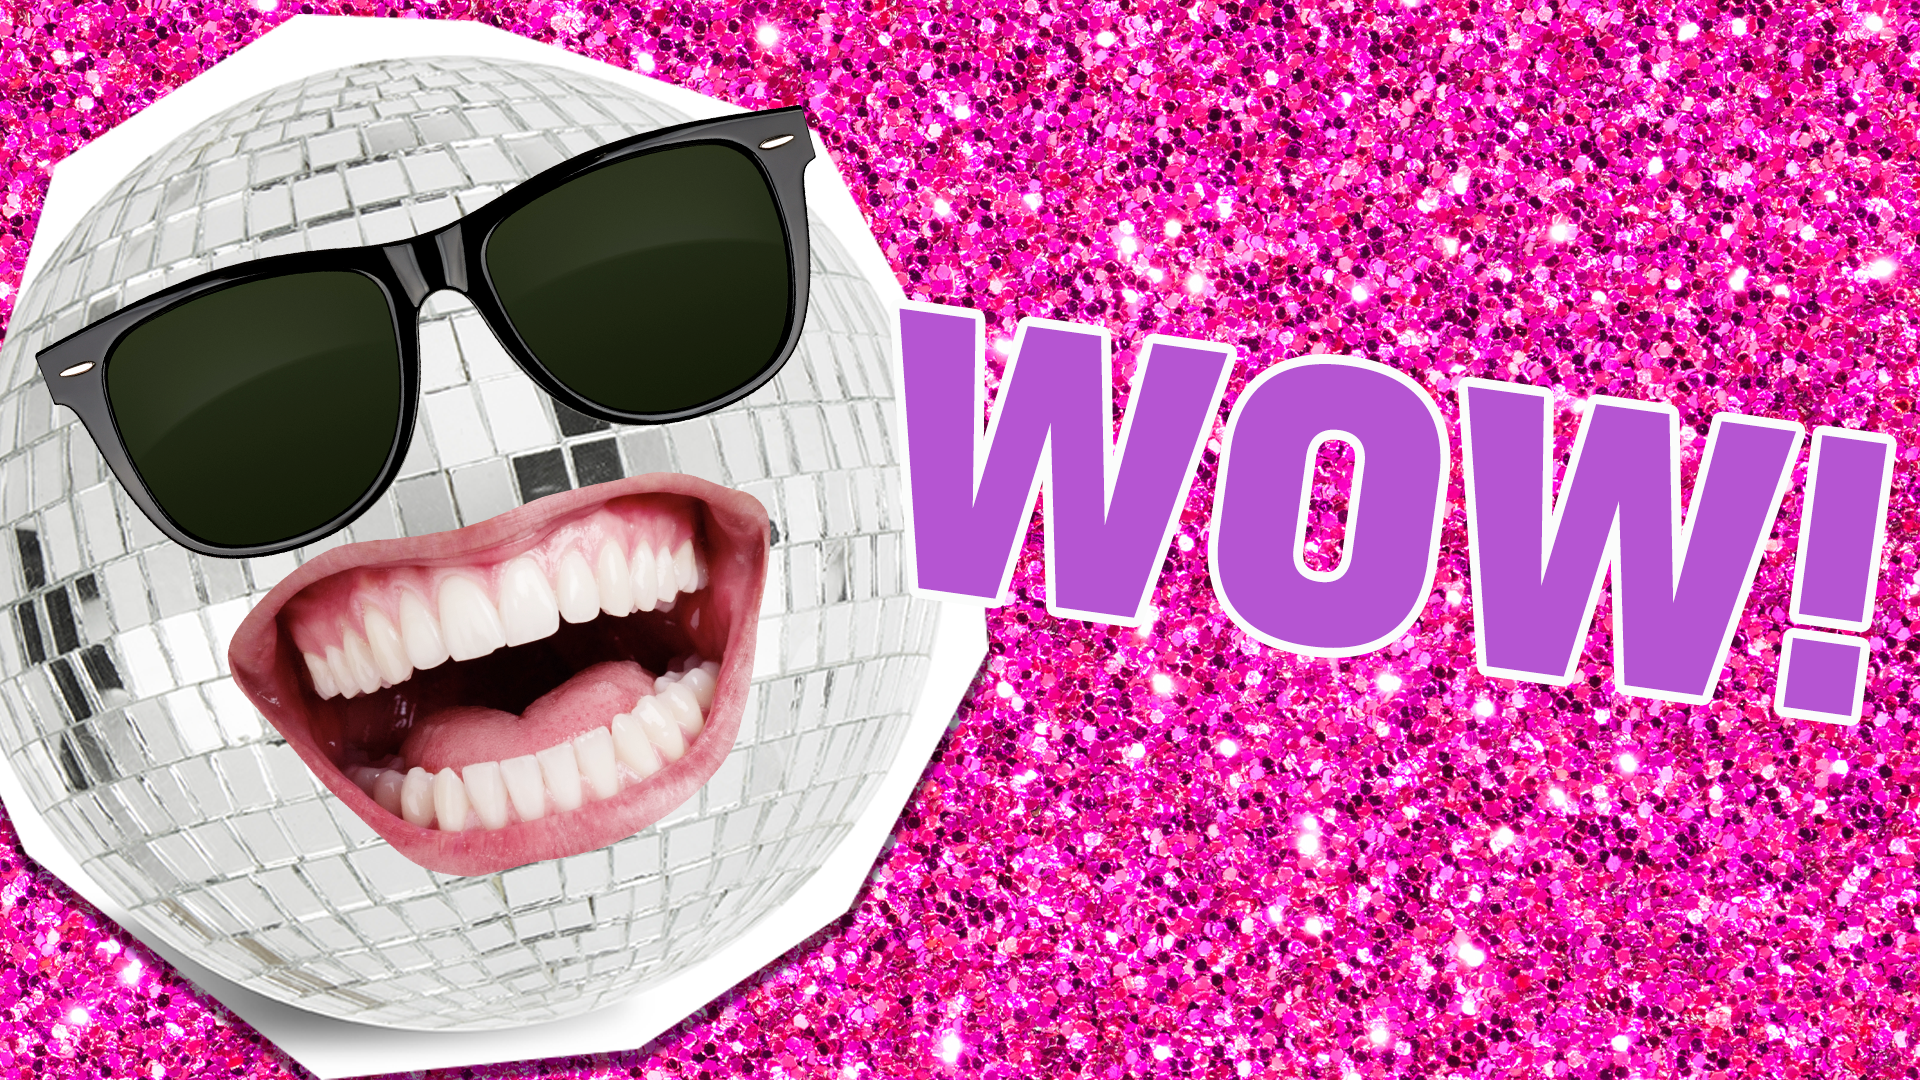 It's tens across the board for you, because you just aced this quiz! Congrats! Keep dancing!